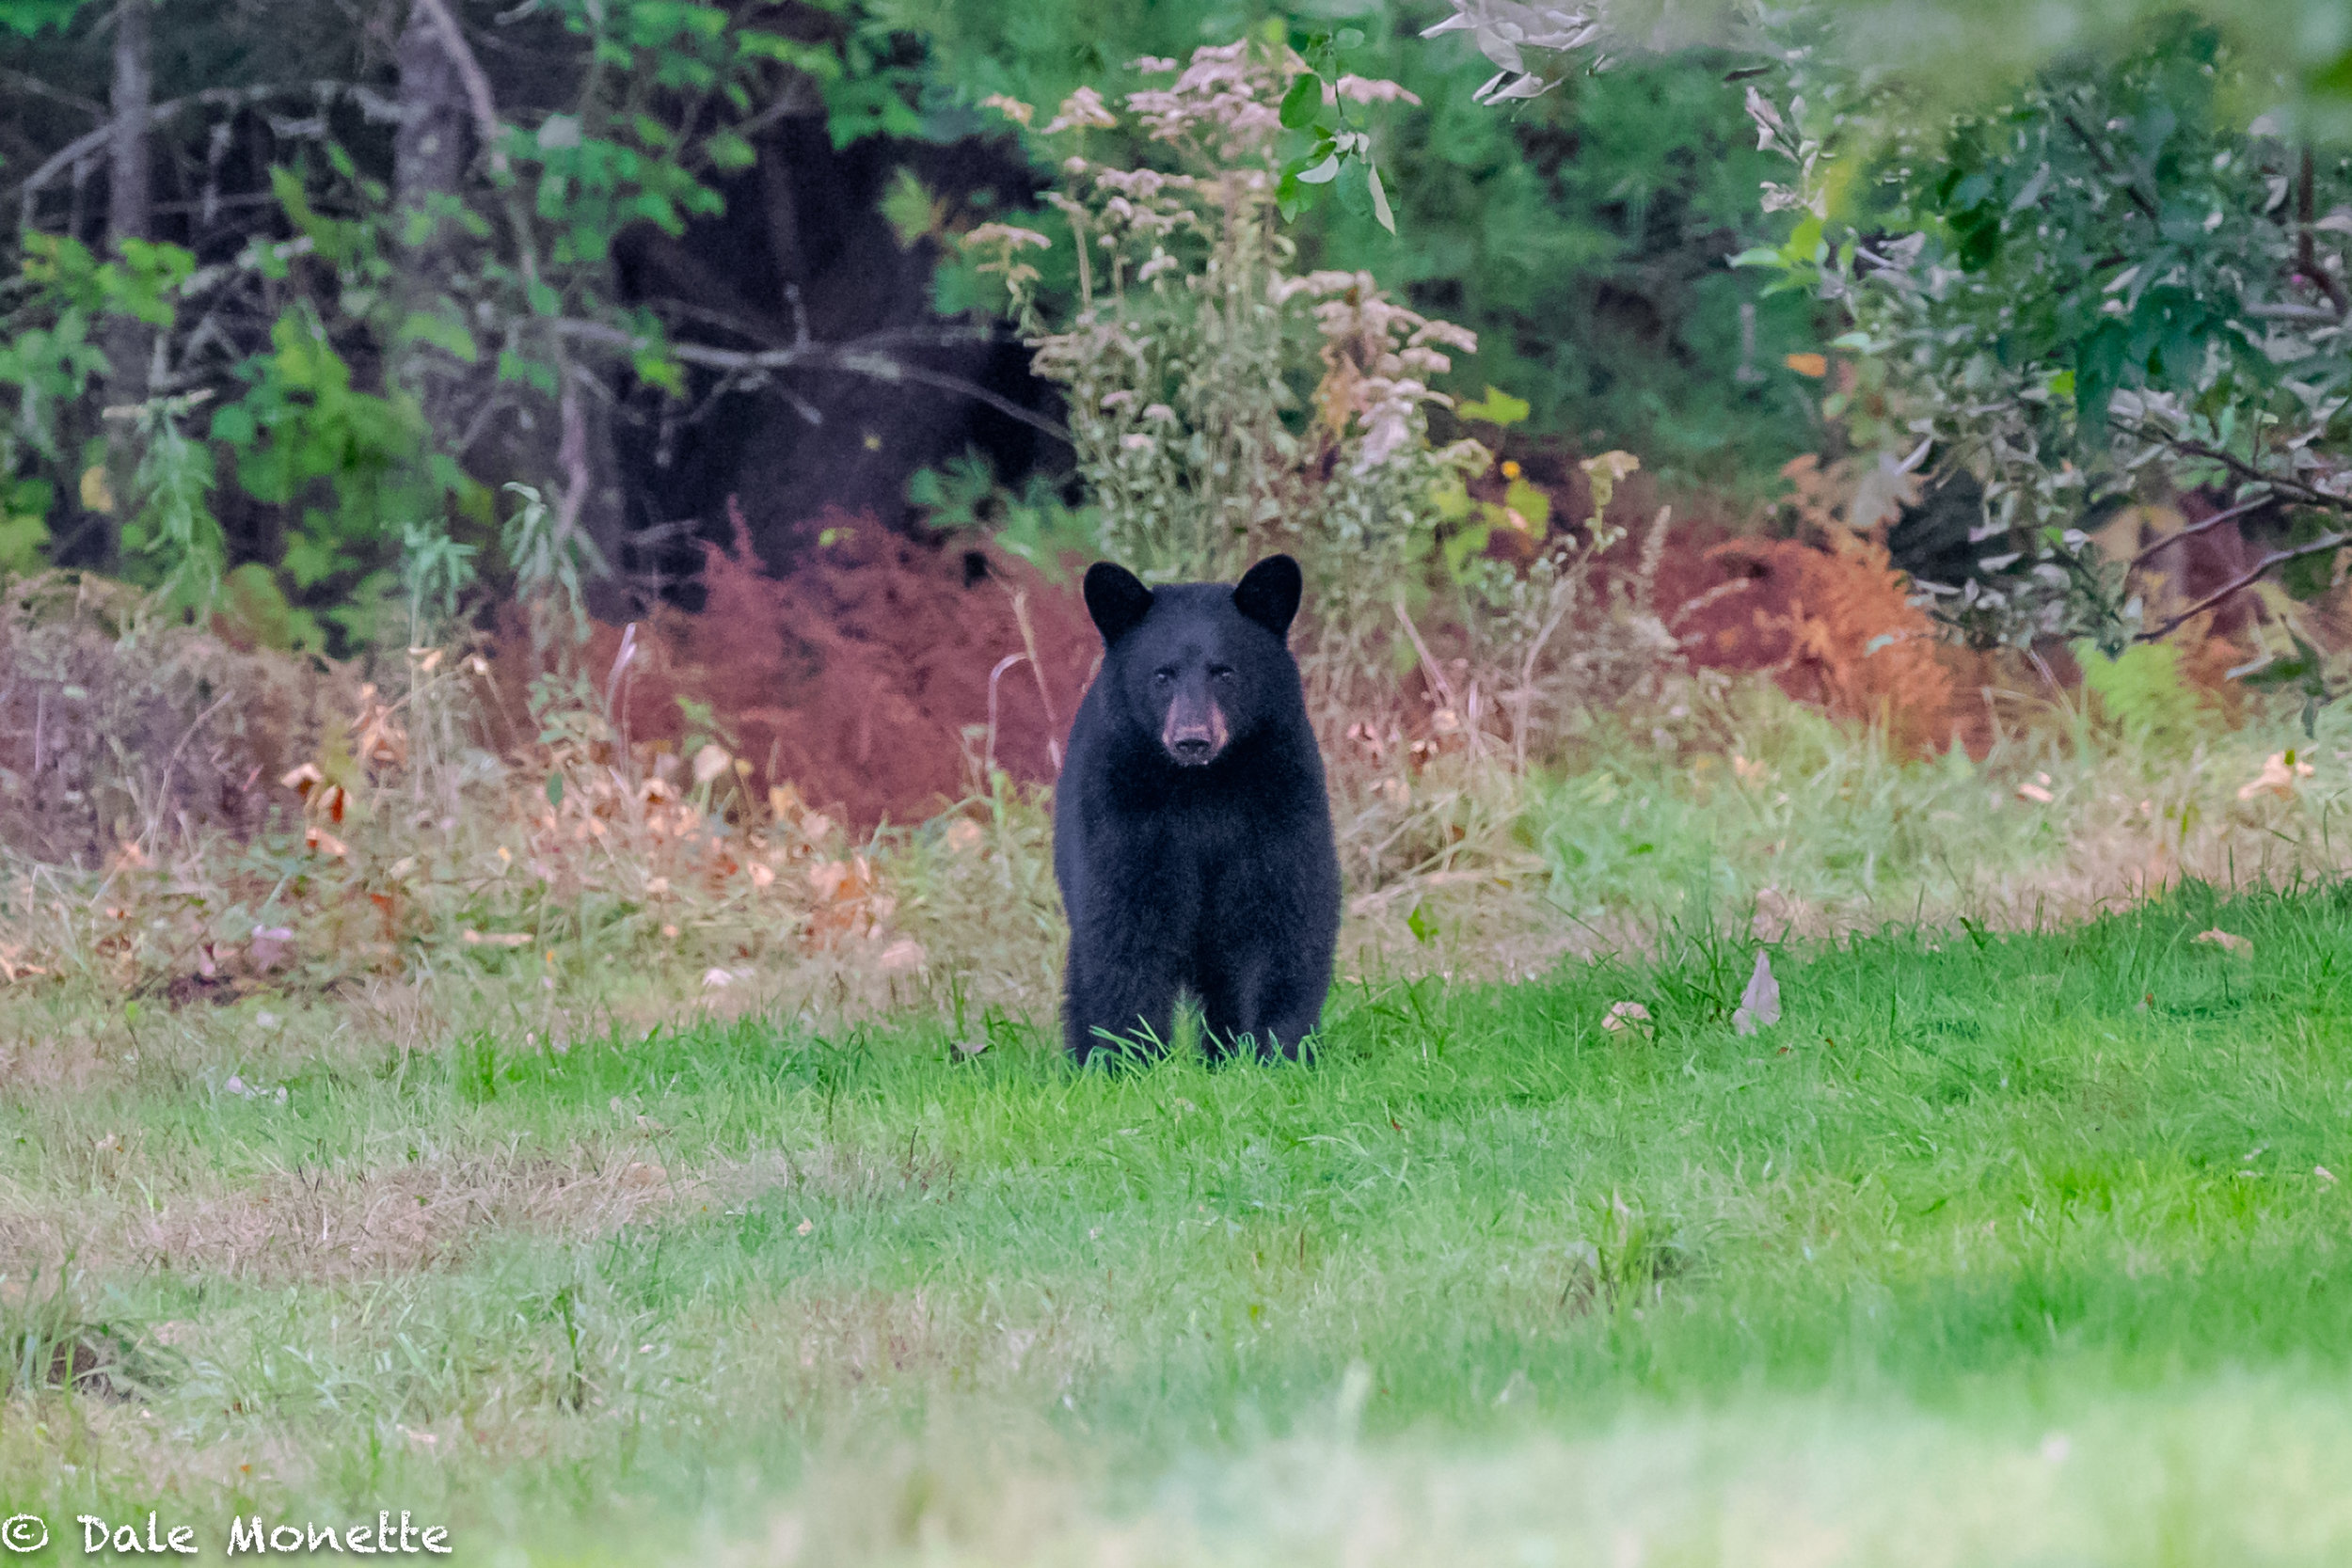   This small bear was after apples. I was about 100 yards away from him when he appeared. He spotted me behind the wall and in the woods but the power of the apples overpowered him and he must have figured I wasn't a threat and carried out his plan. 